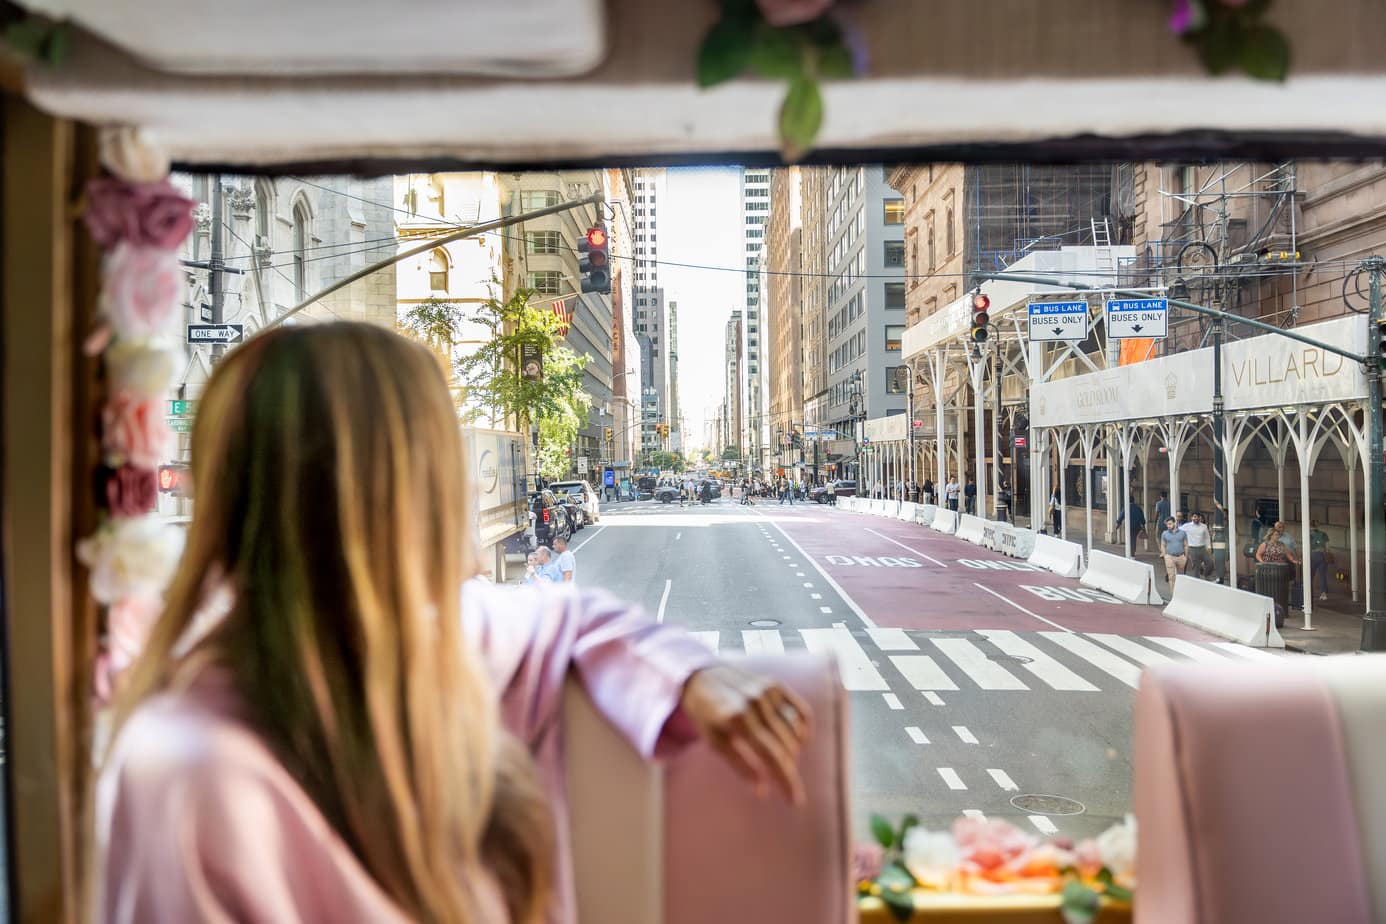 Beautiful view of NYC streets from the back window of the Tea Around Town bus during high tea